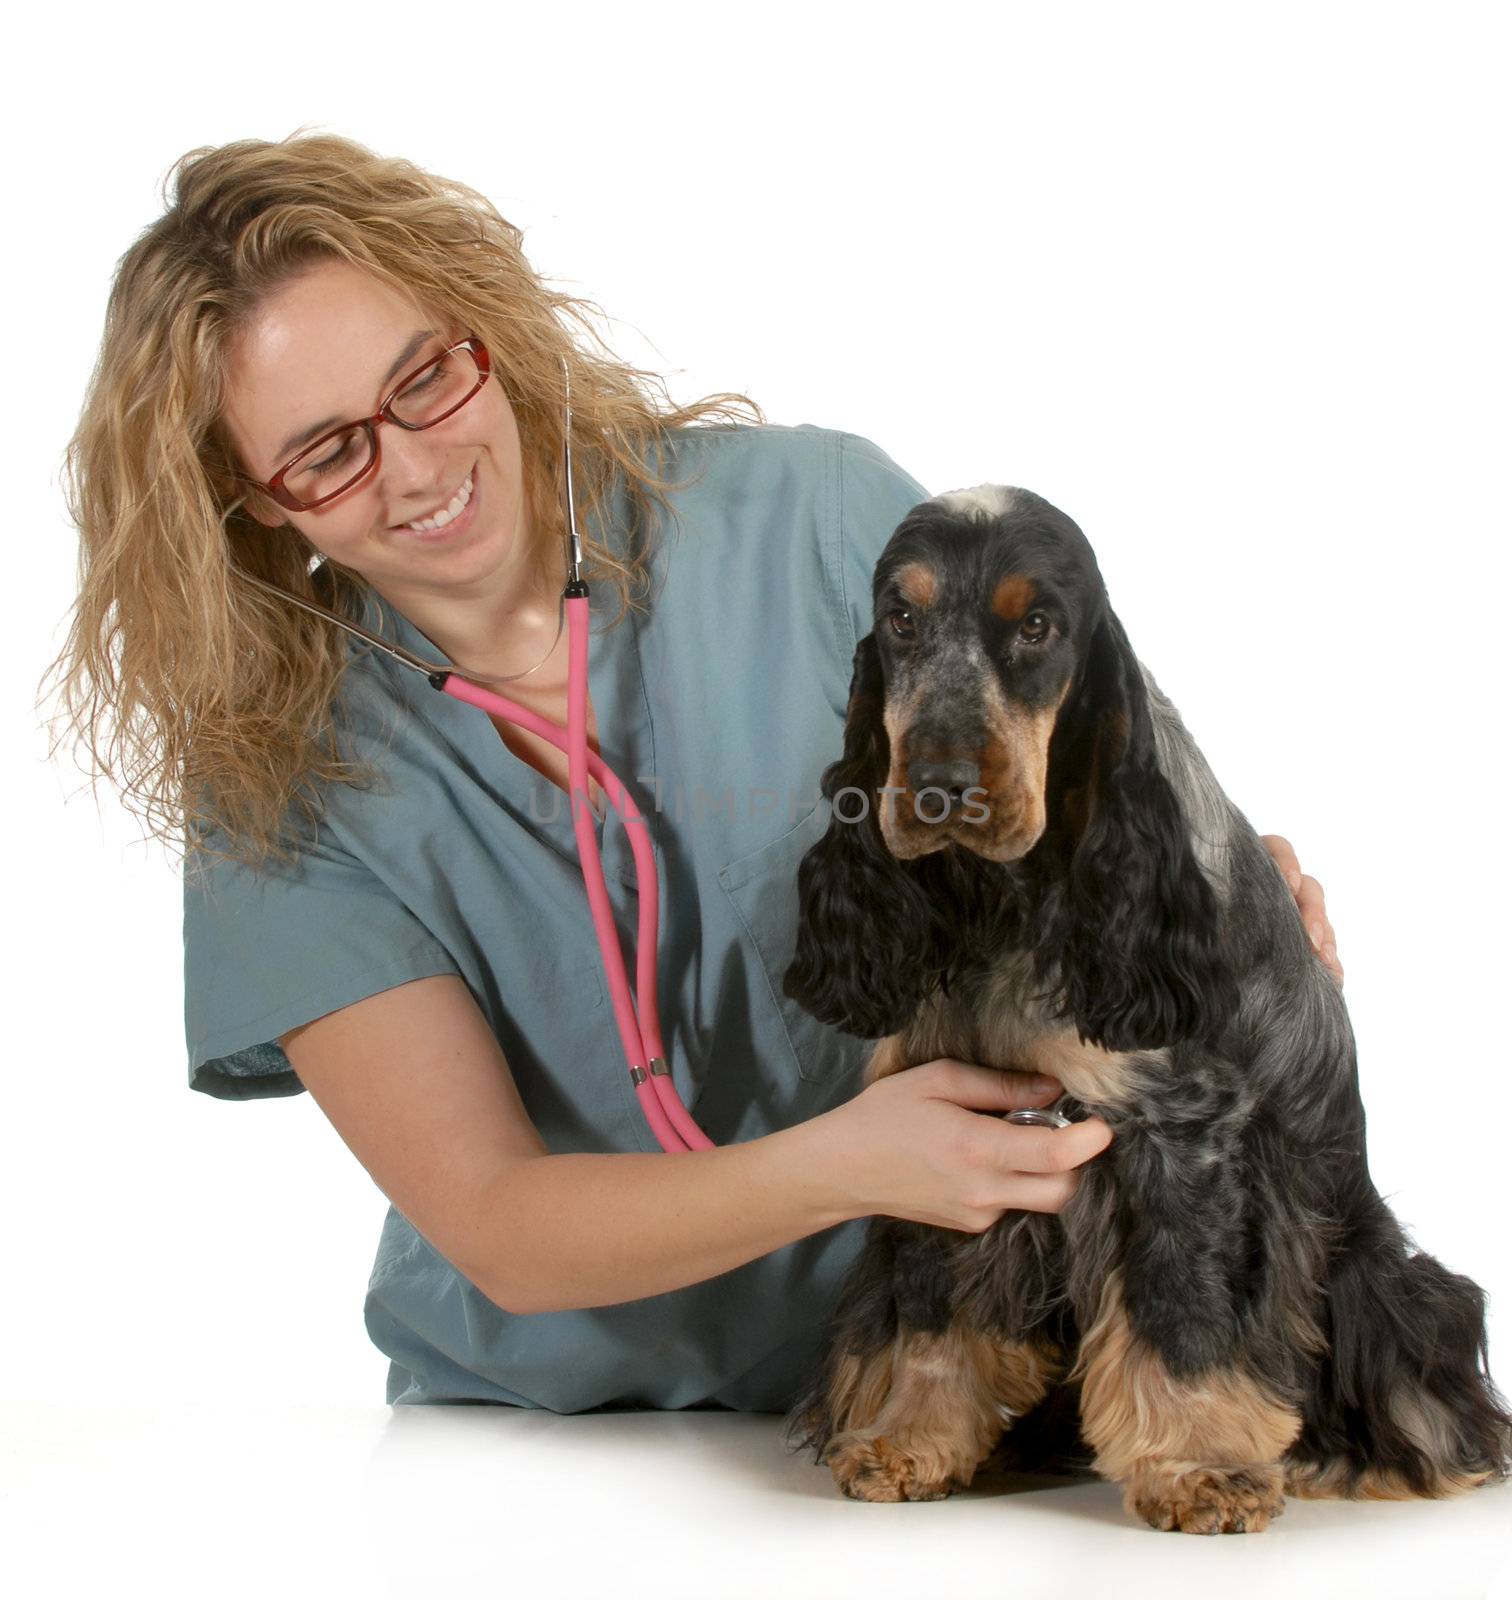 veterinary care - veterinarian listening to dog heart with stethoscope on white background - english cocker spaniel